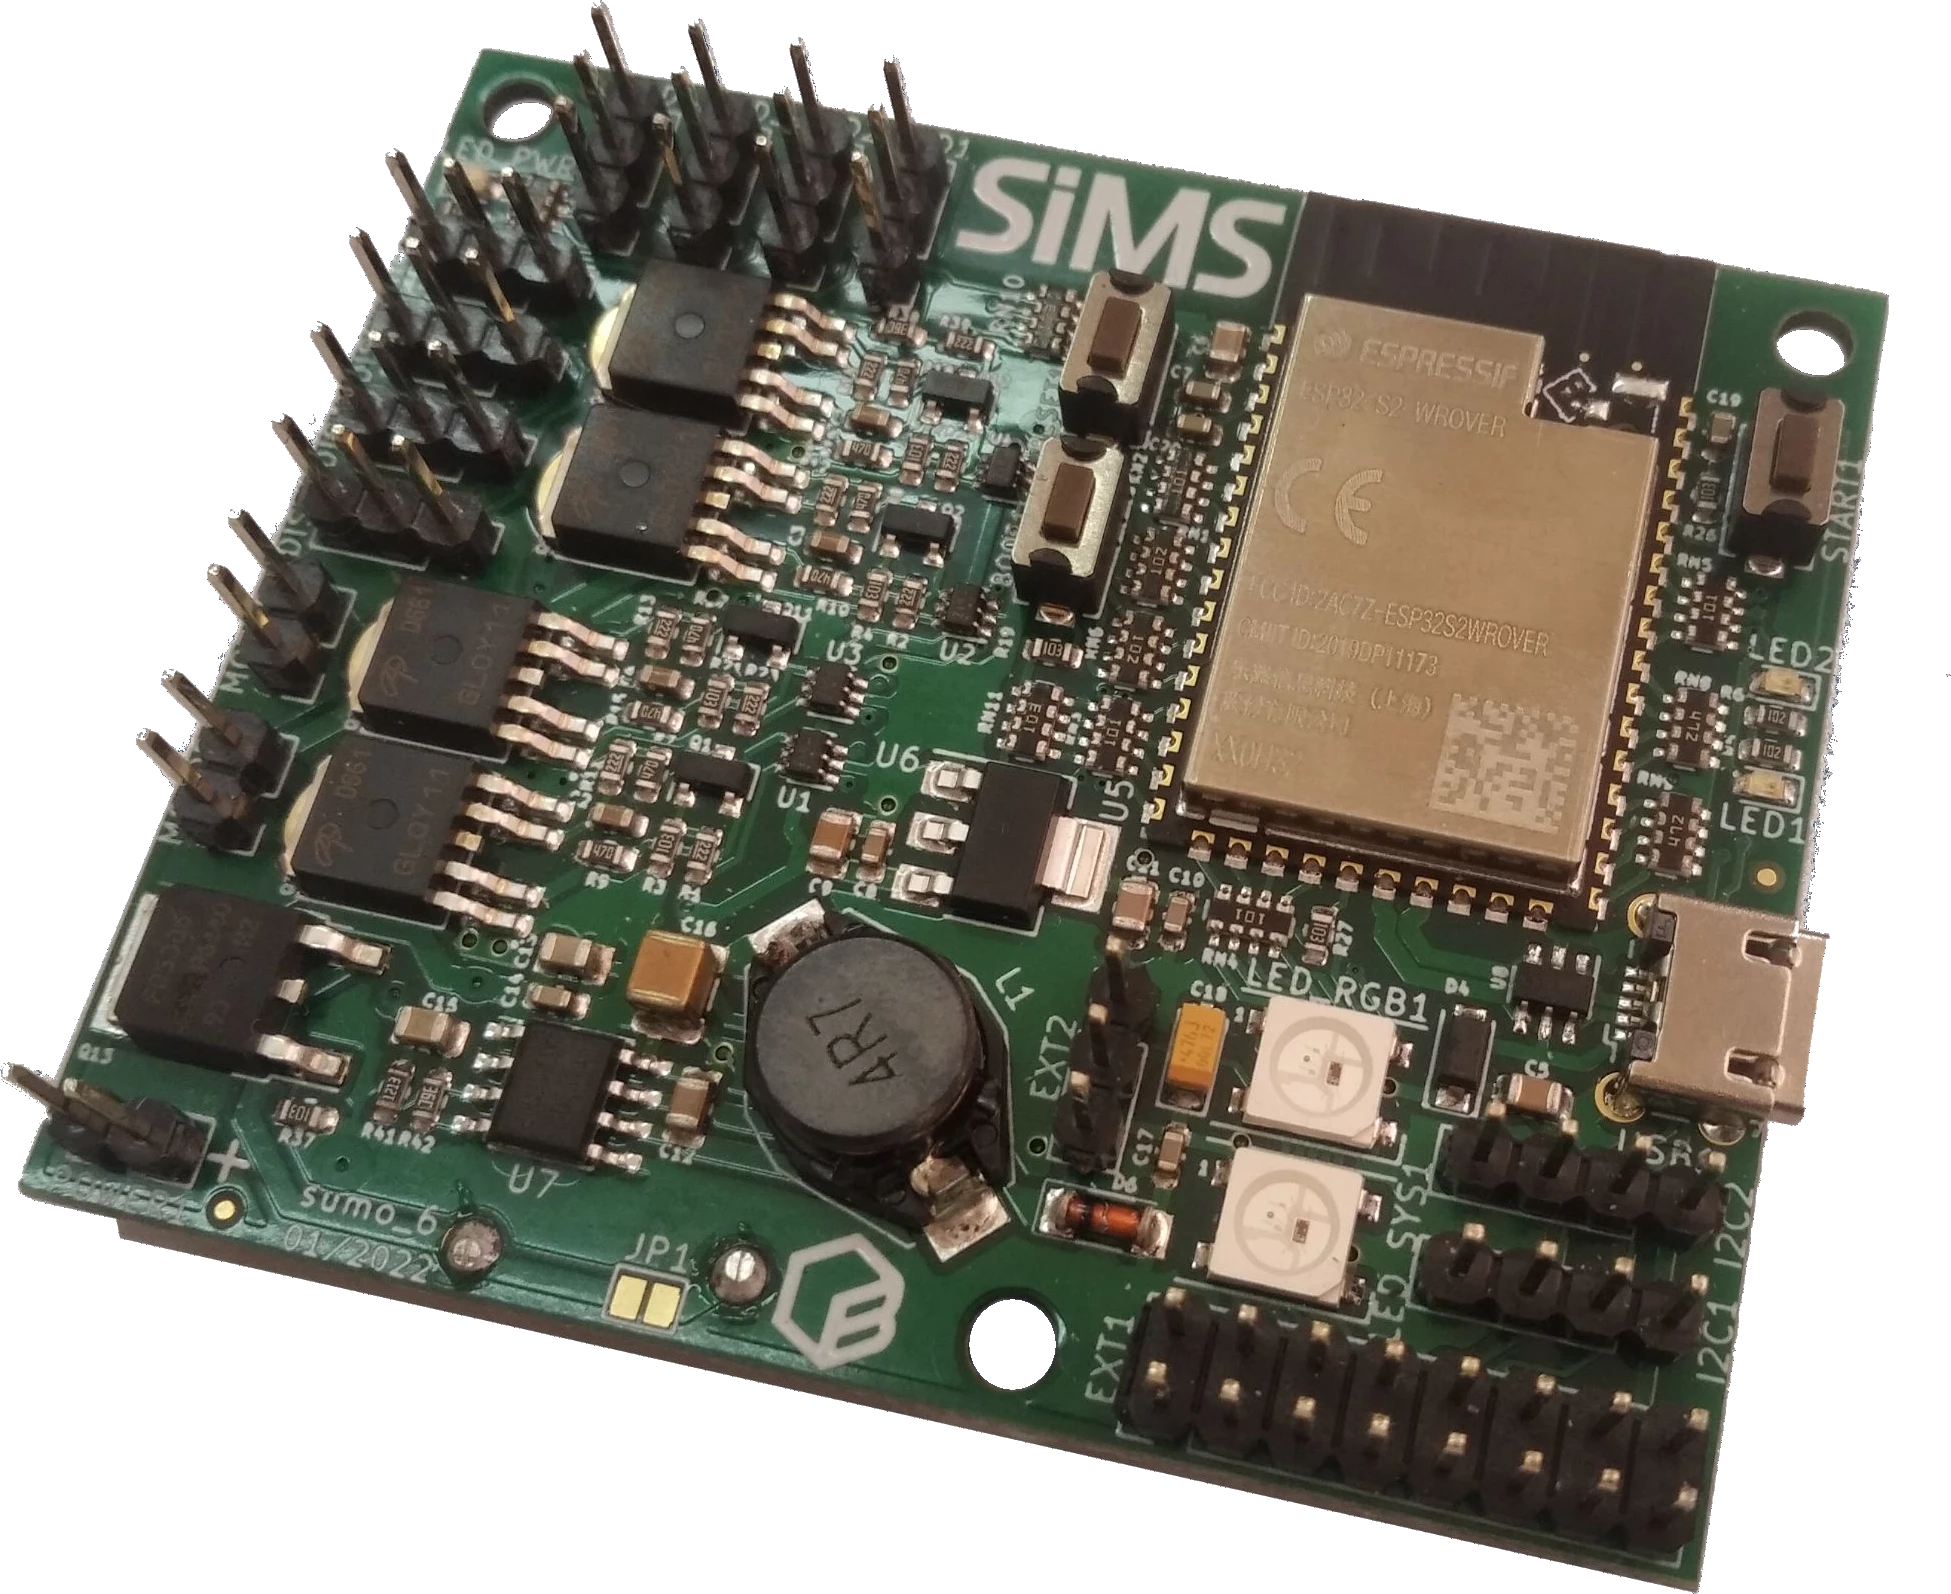 Image of the mentioned custom board with ESP32